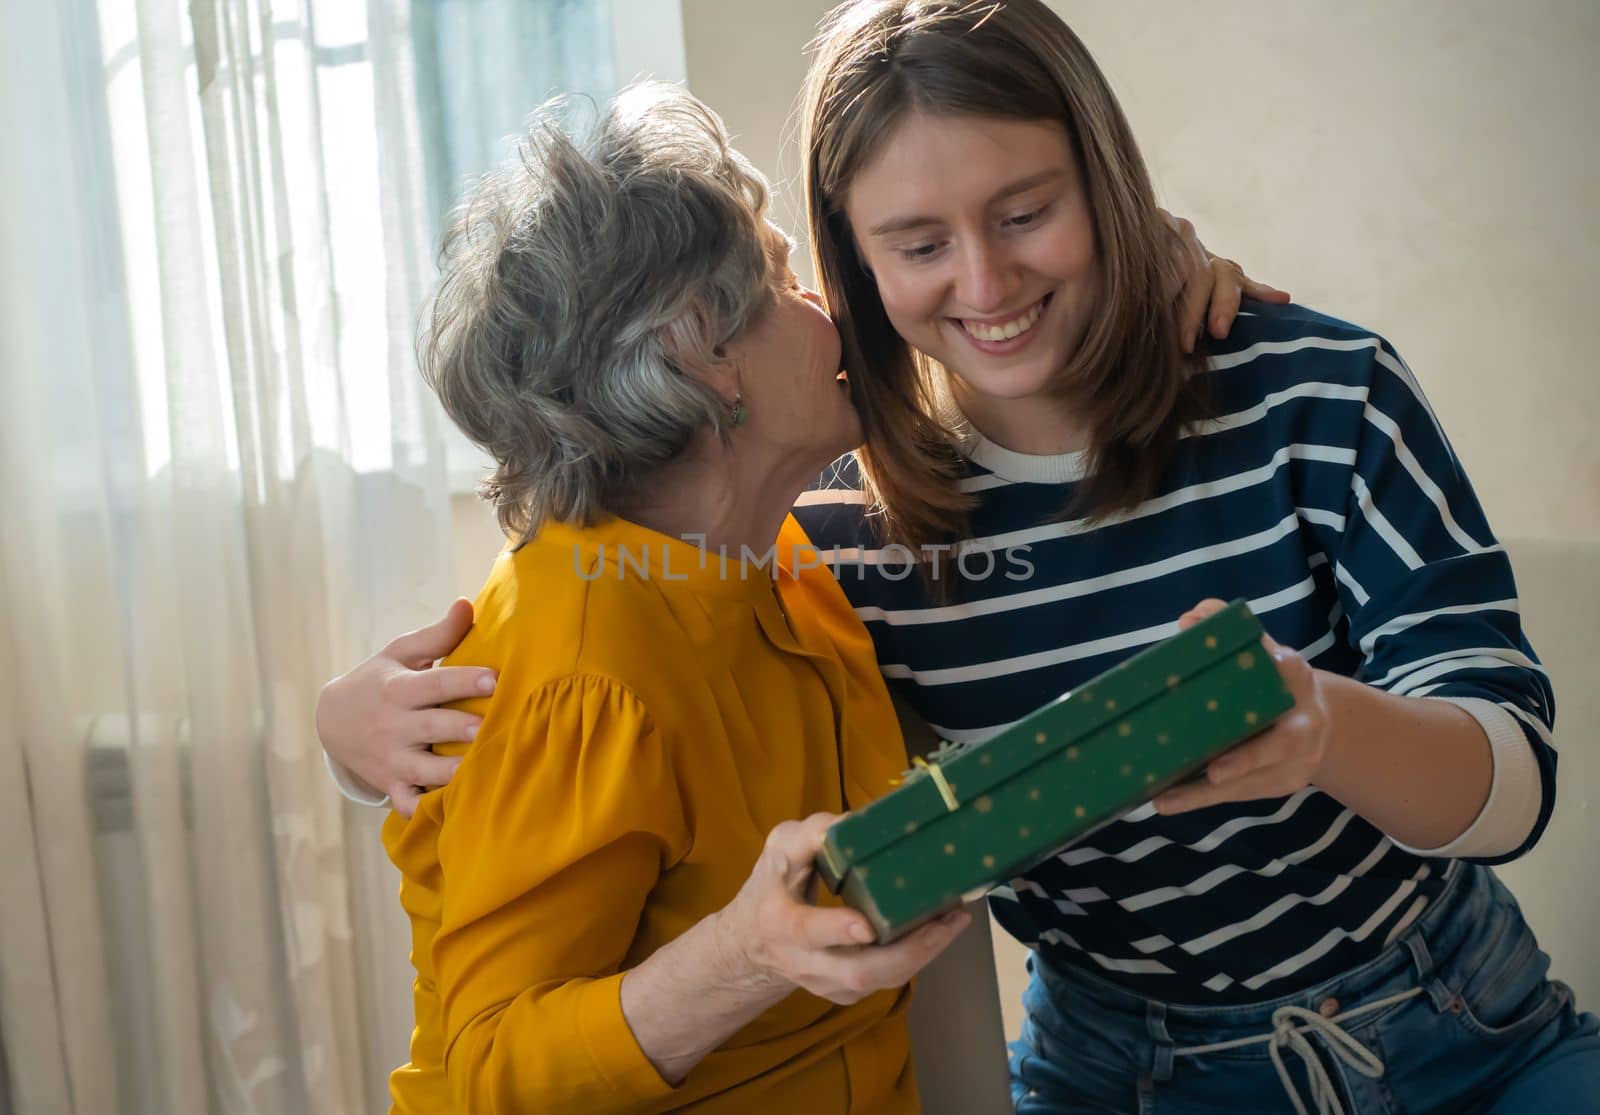 Two women, relatives, happily spend time together, grandmother and daughter give gifts to each other for the holidays, make pleasant surprises, love and emotional bonding inside the family.